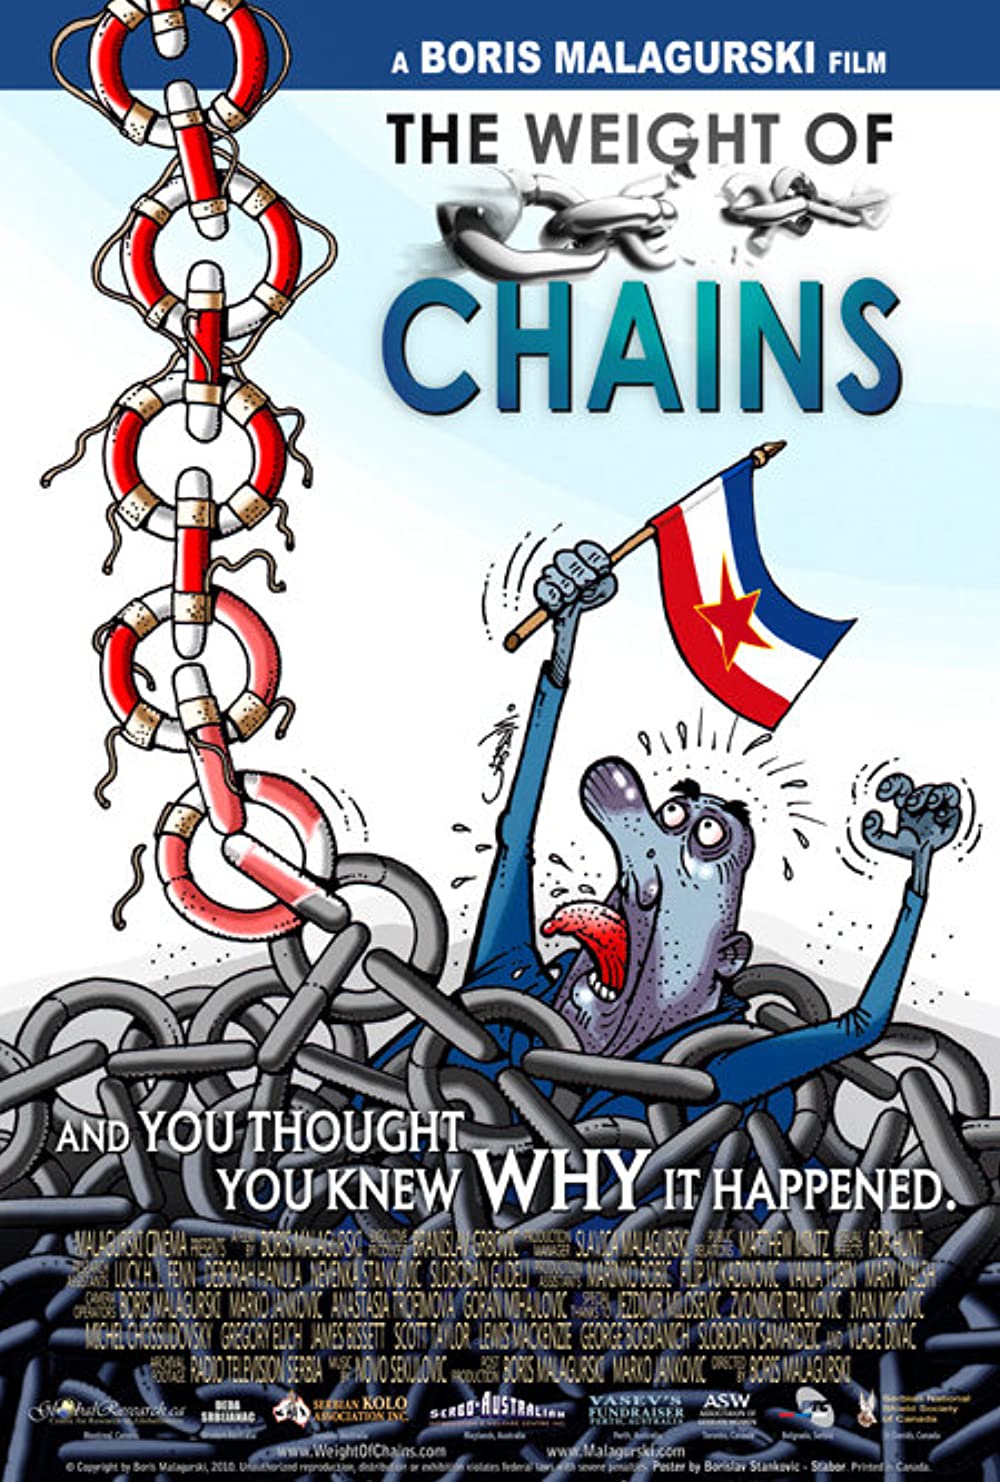 The Weight of Chains (2010)